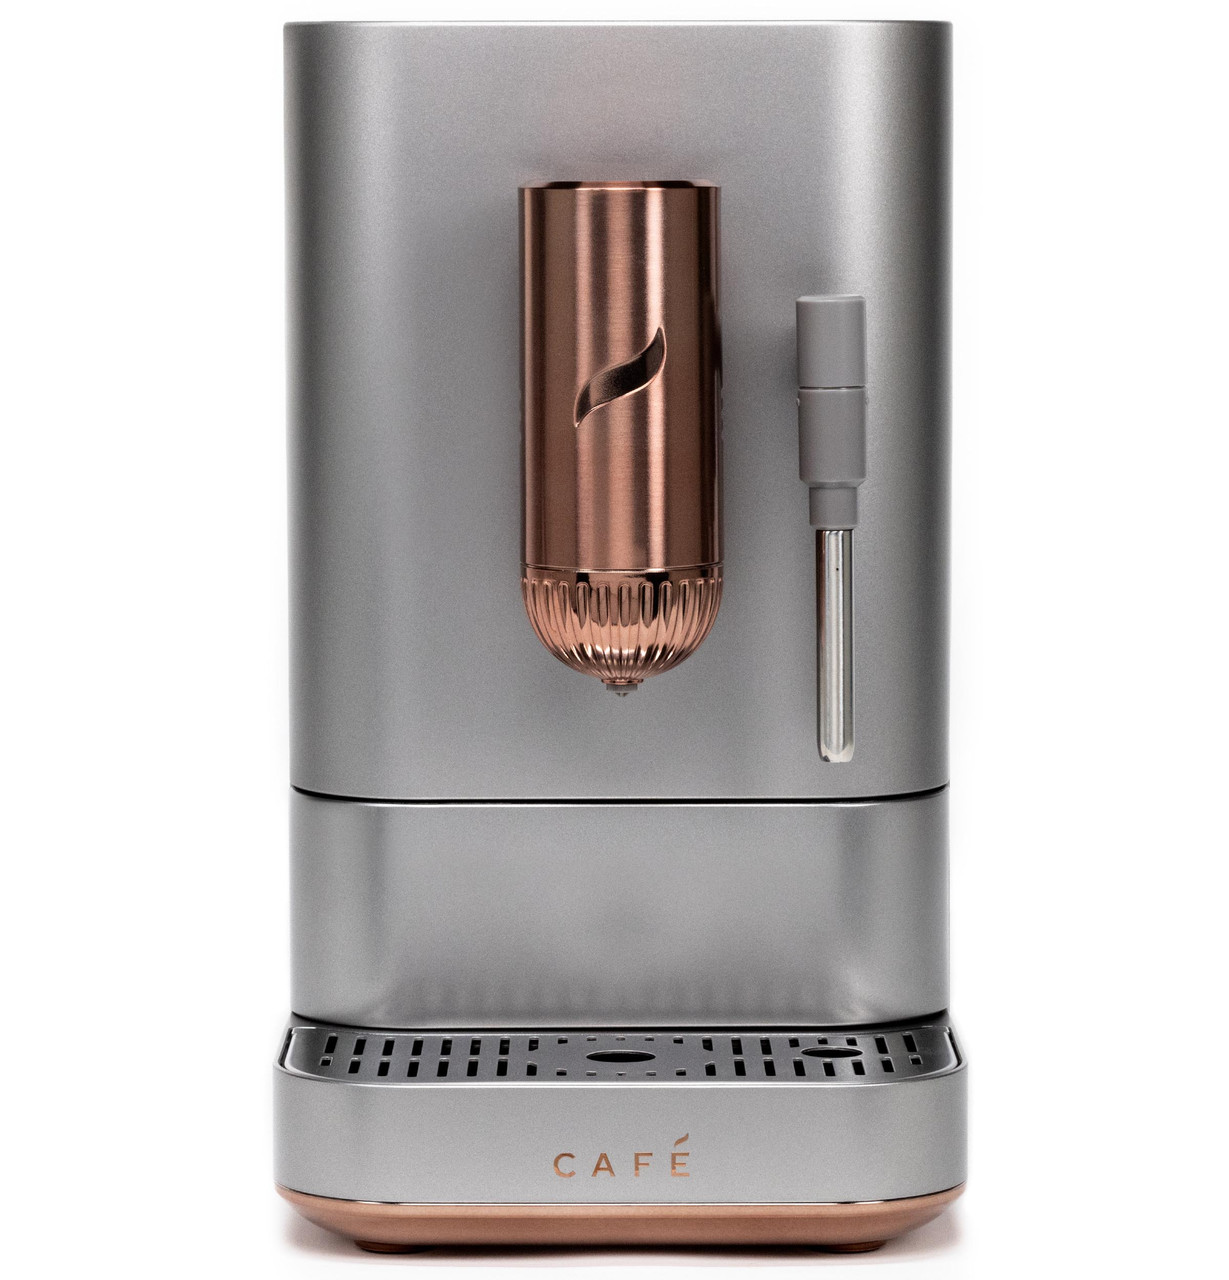 My Honest Review on the New Luxury GE Café Appliances Refrigerator - Color  & Chic